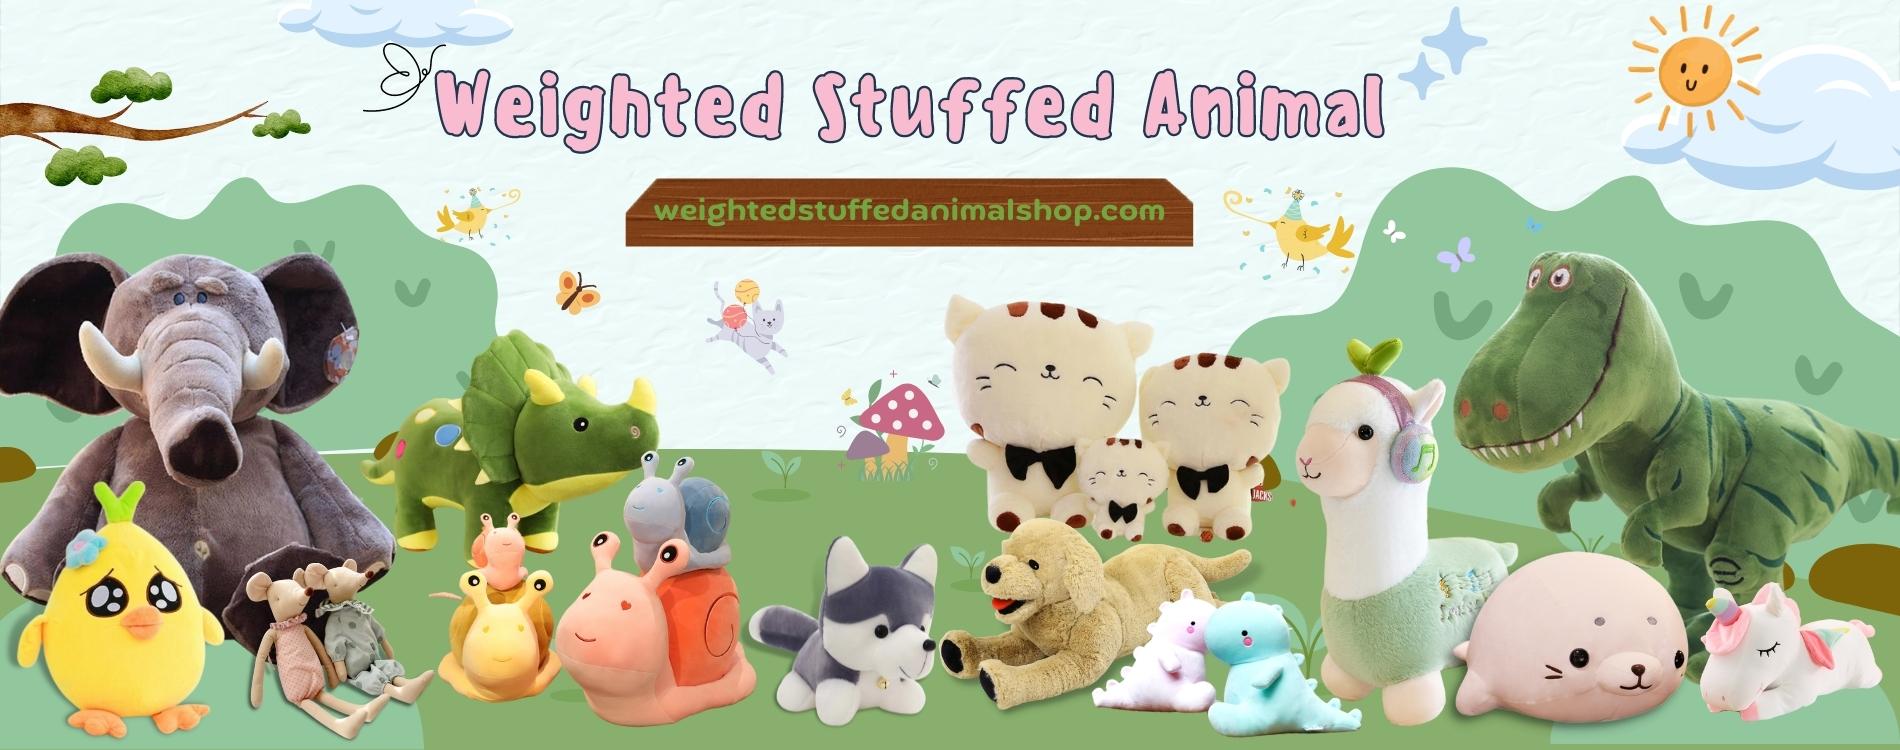 weighted stuffed animal banner 2